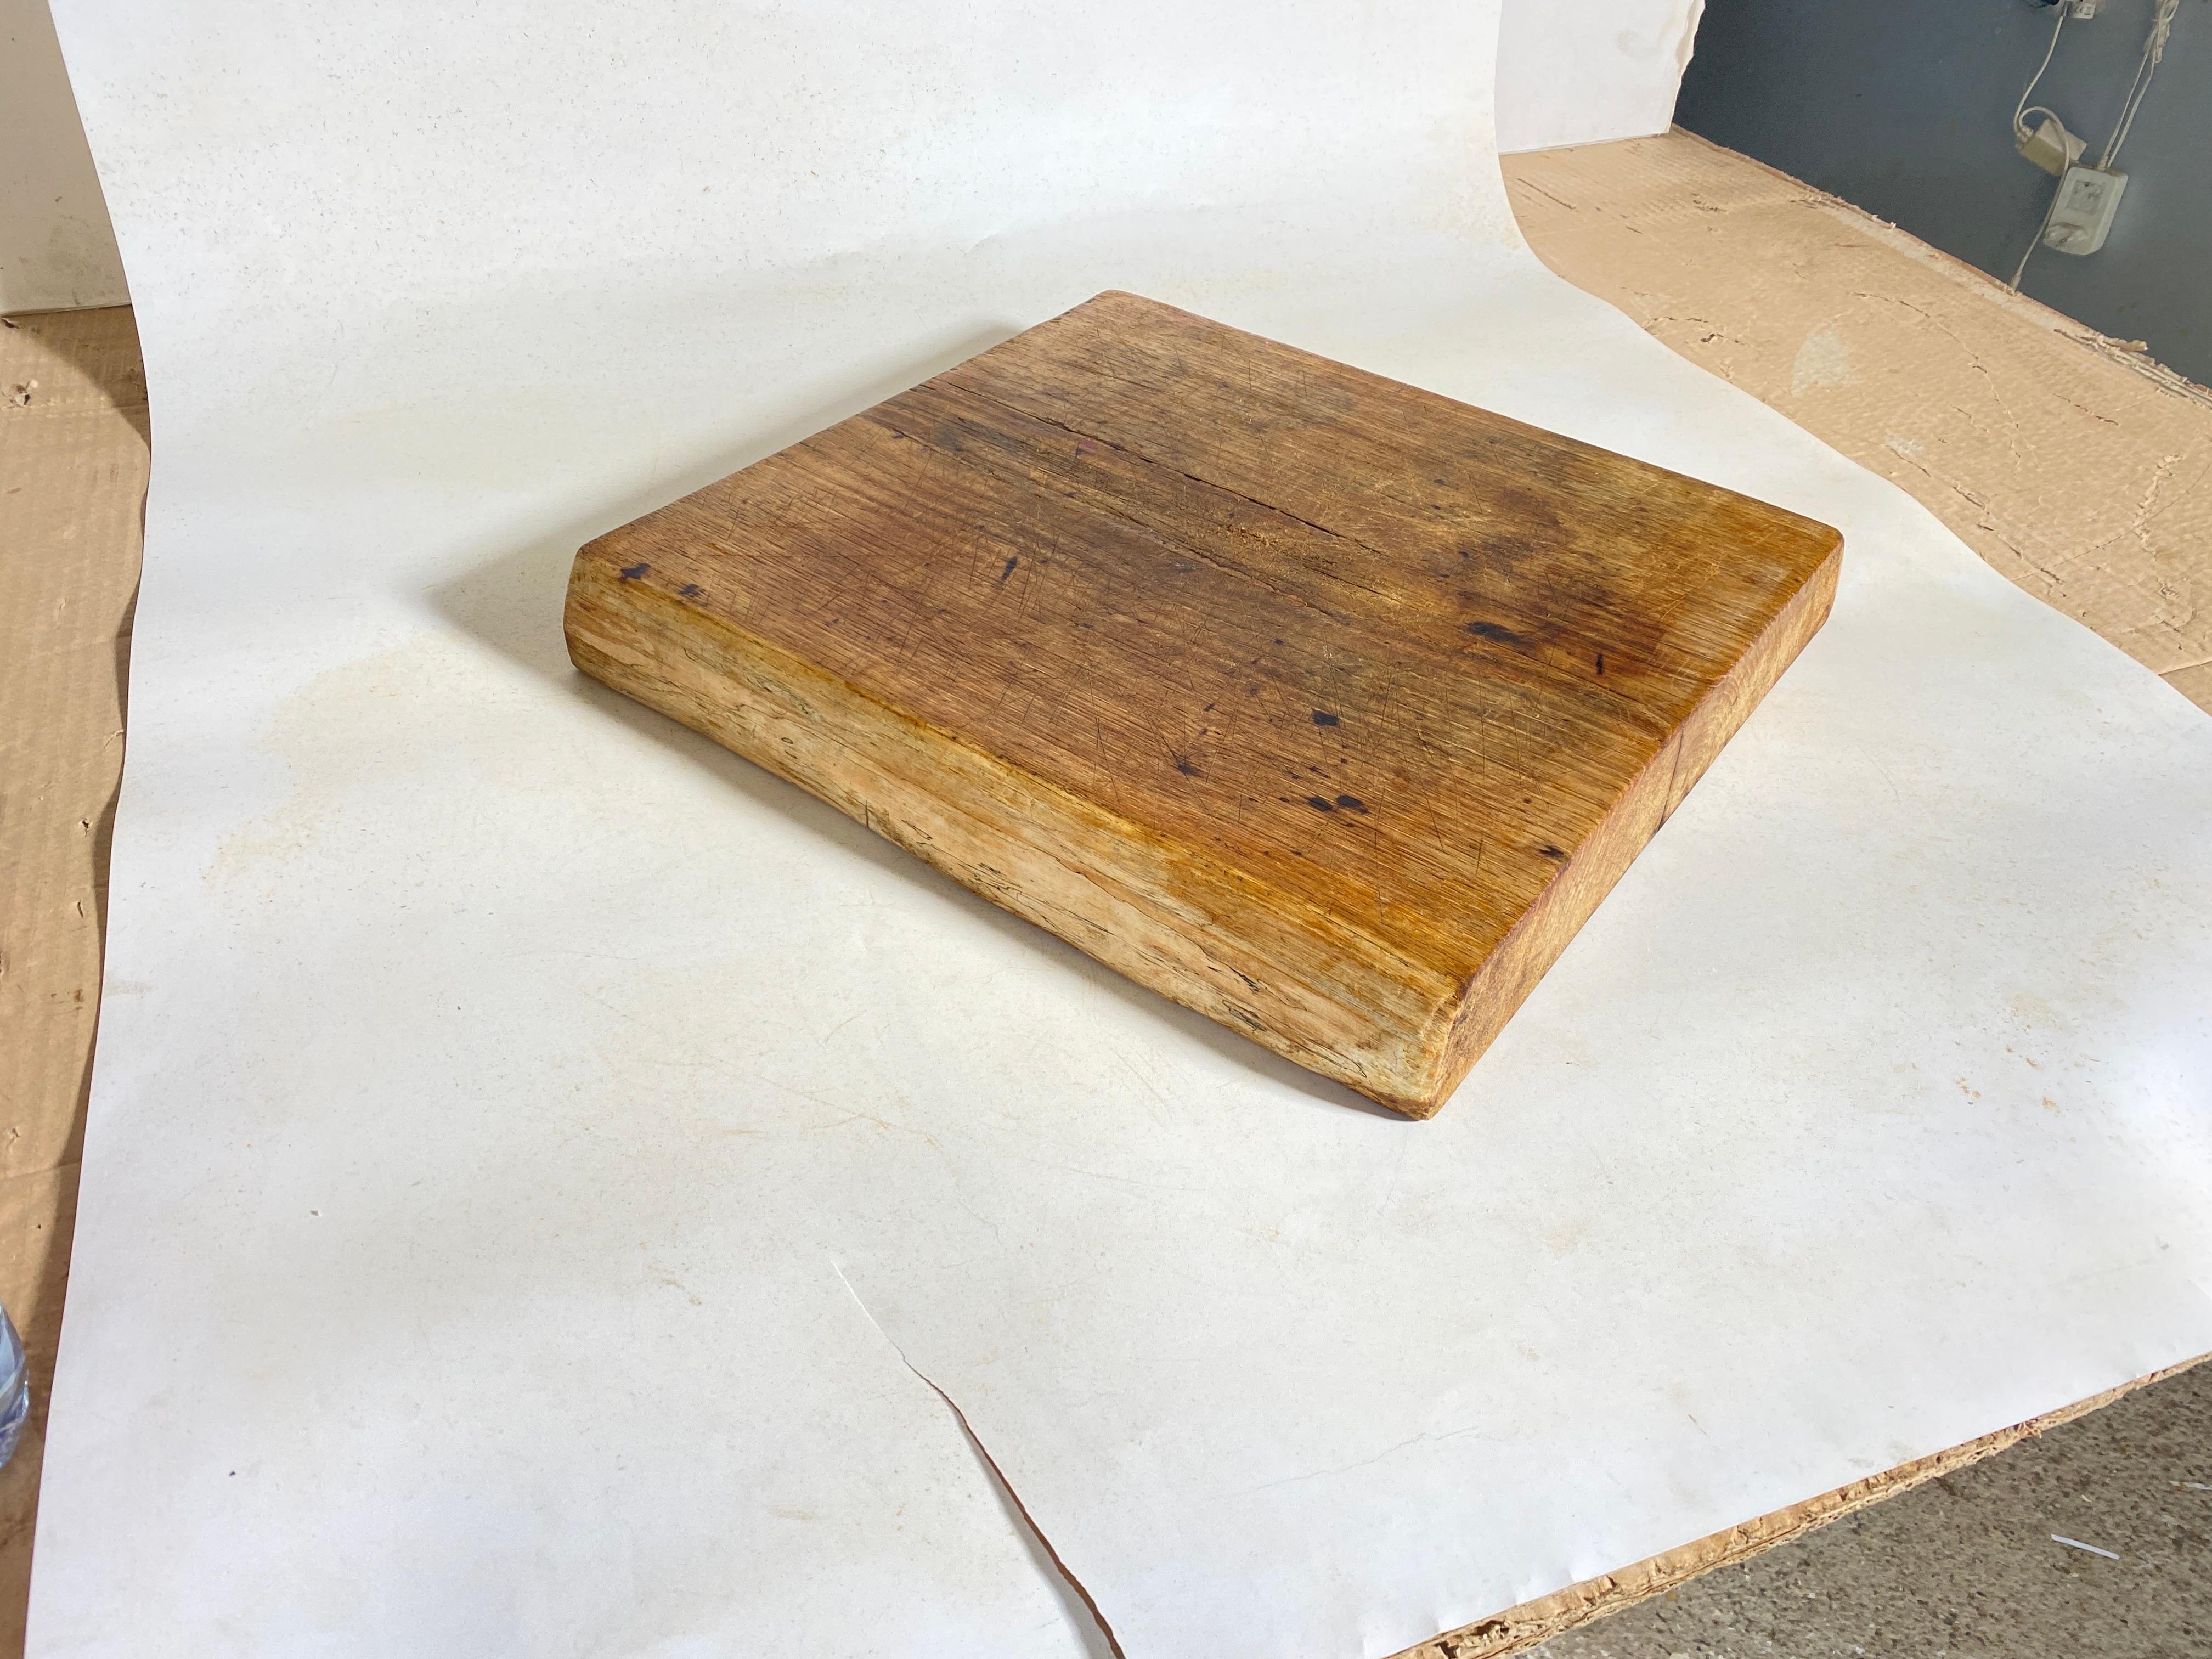 French Provincial Large Wooden Chopping or Cutting Board Old Patina, Brown Color France 20th  For Sale